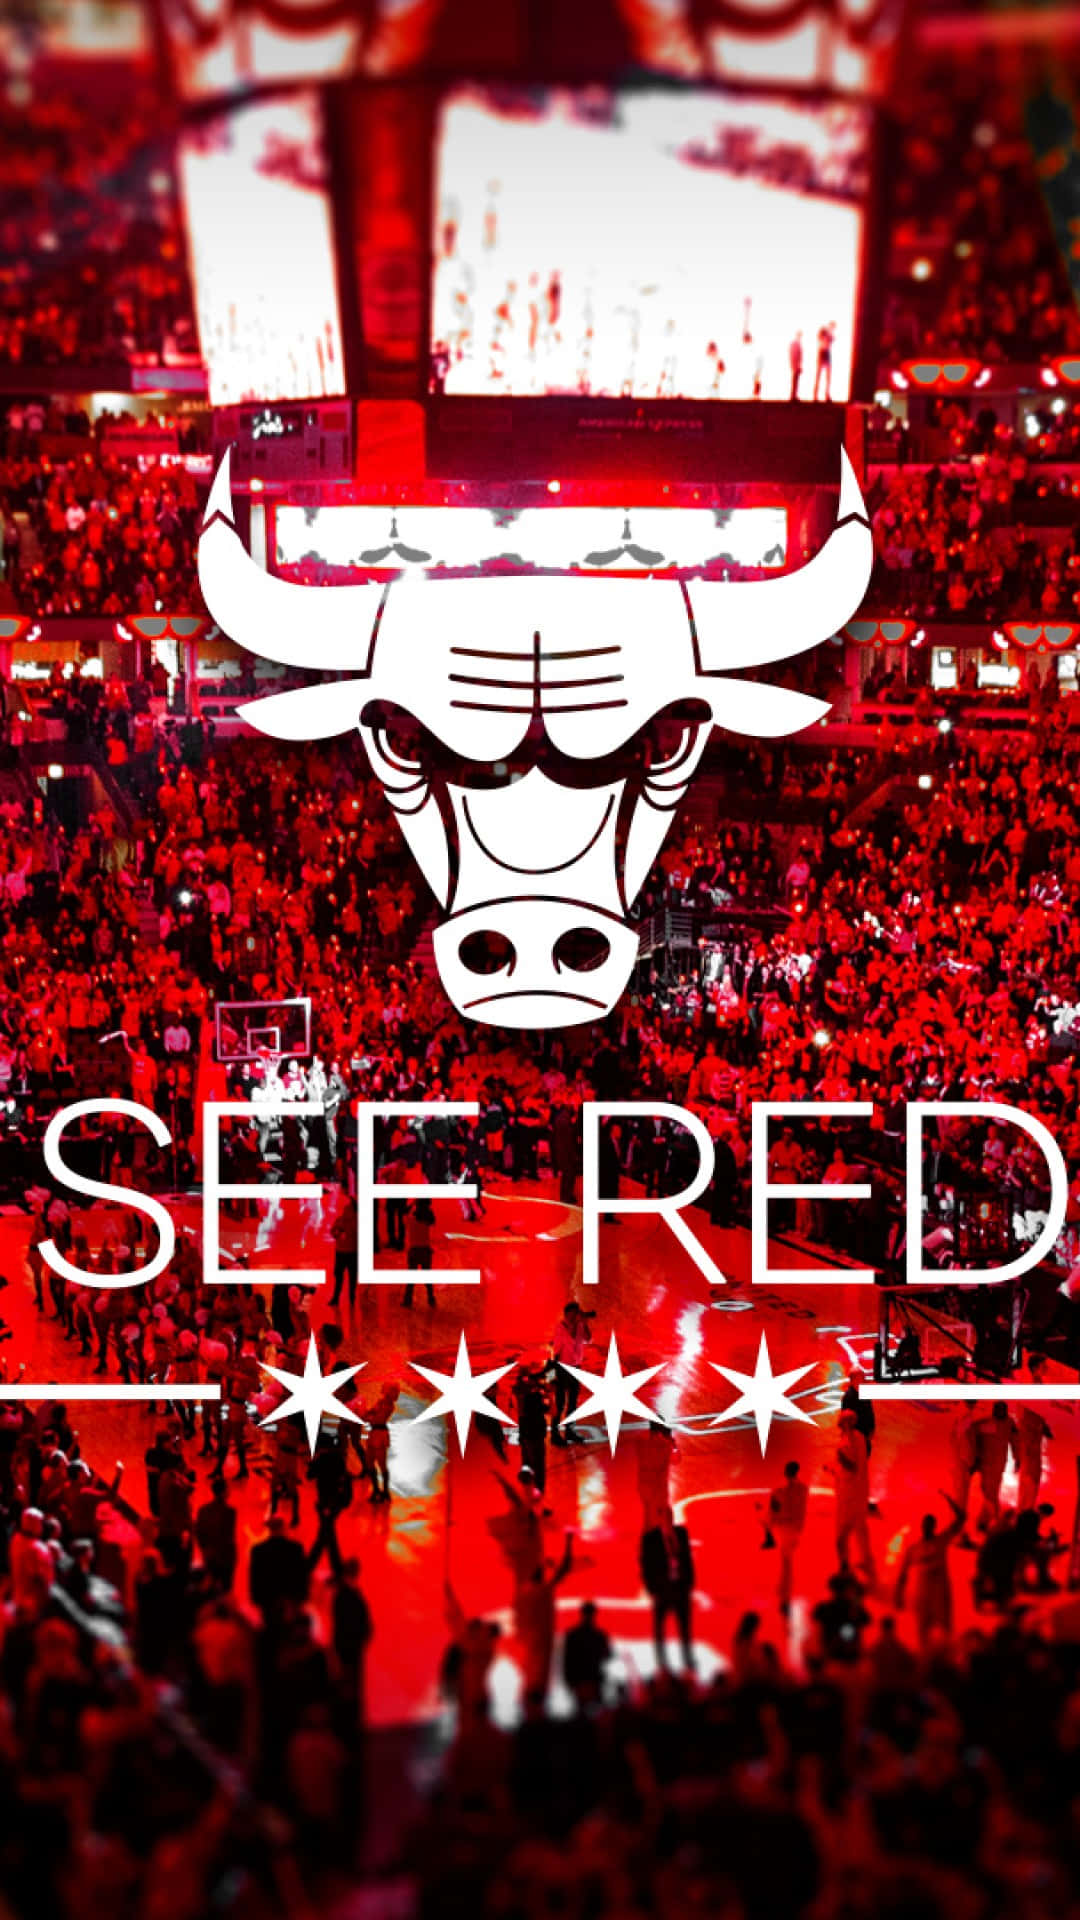 The Chicago Bulls Logo With The Words See Red Background